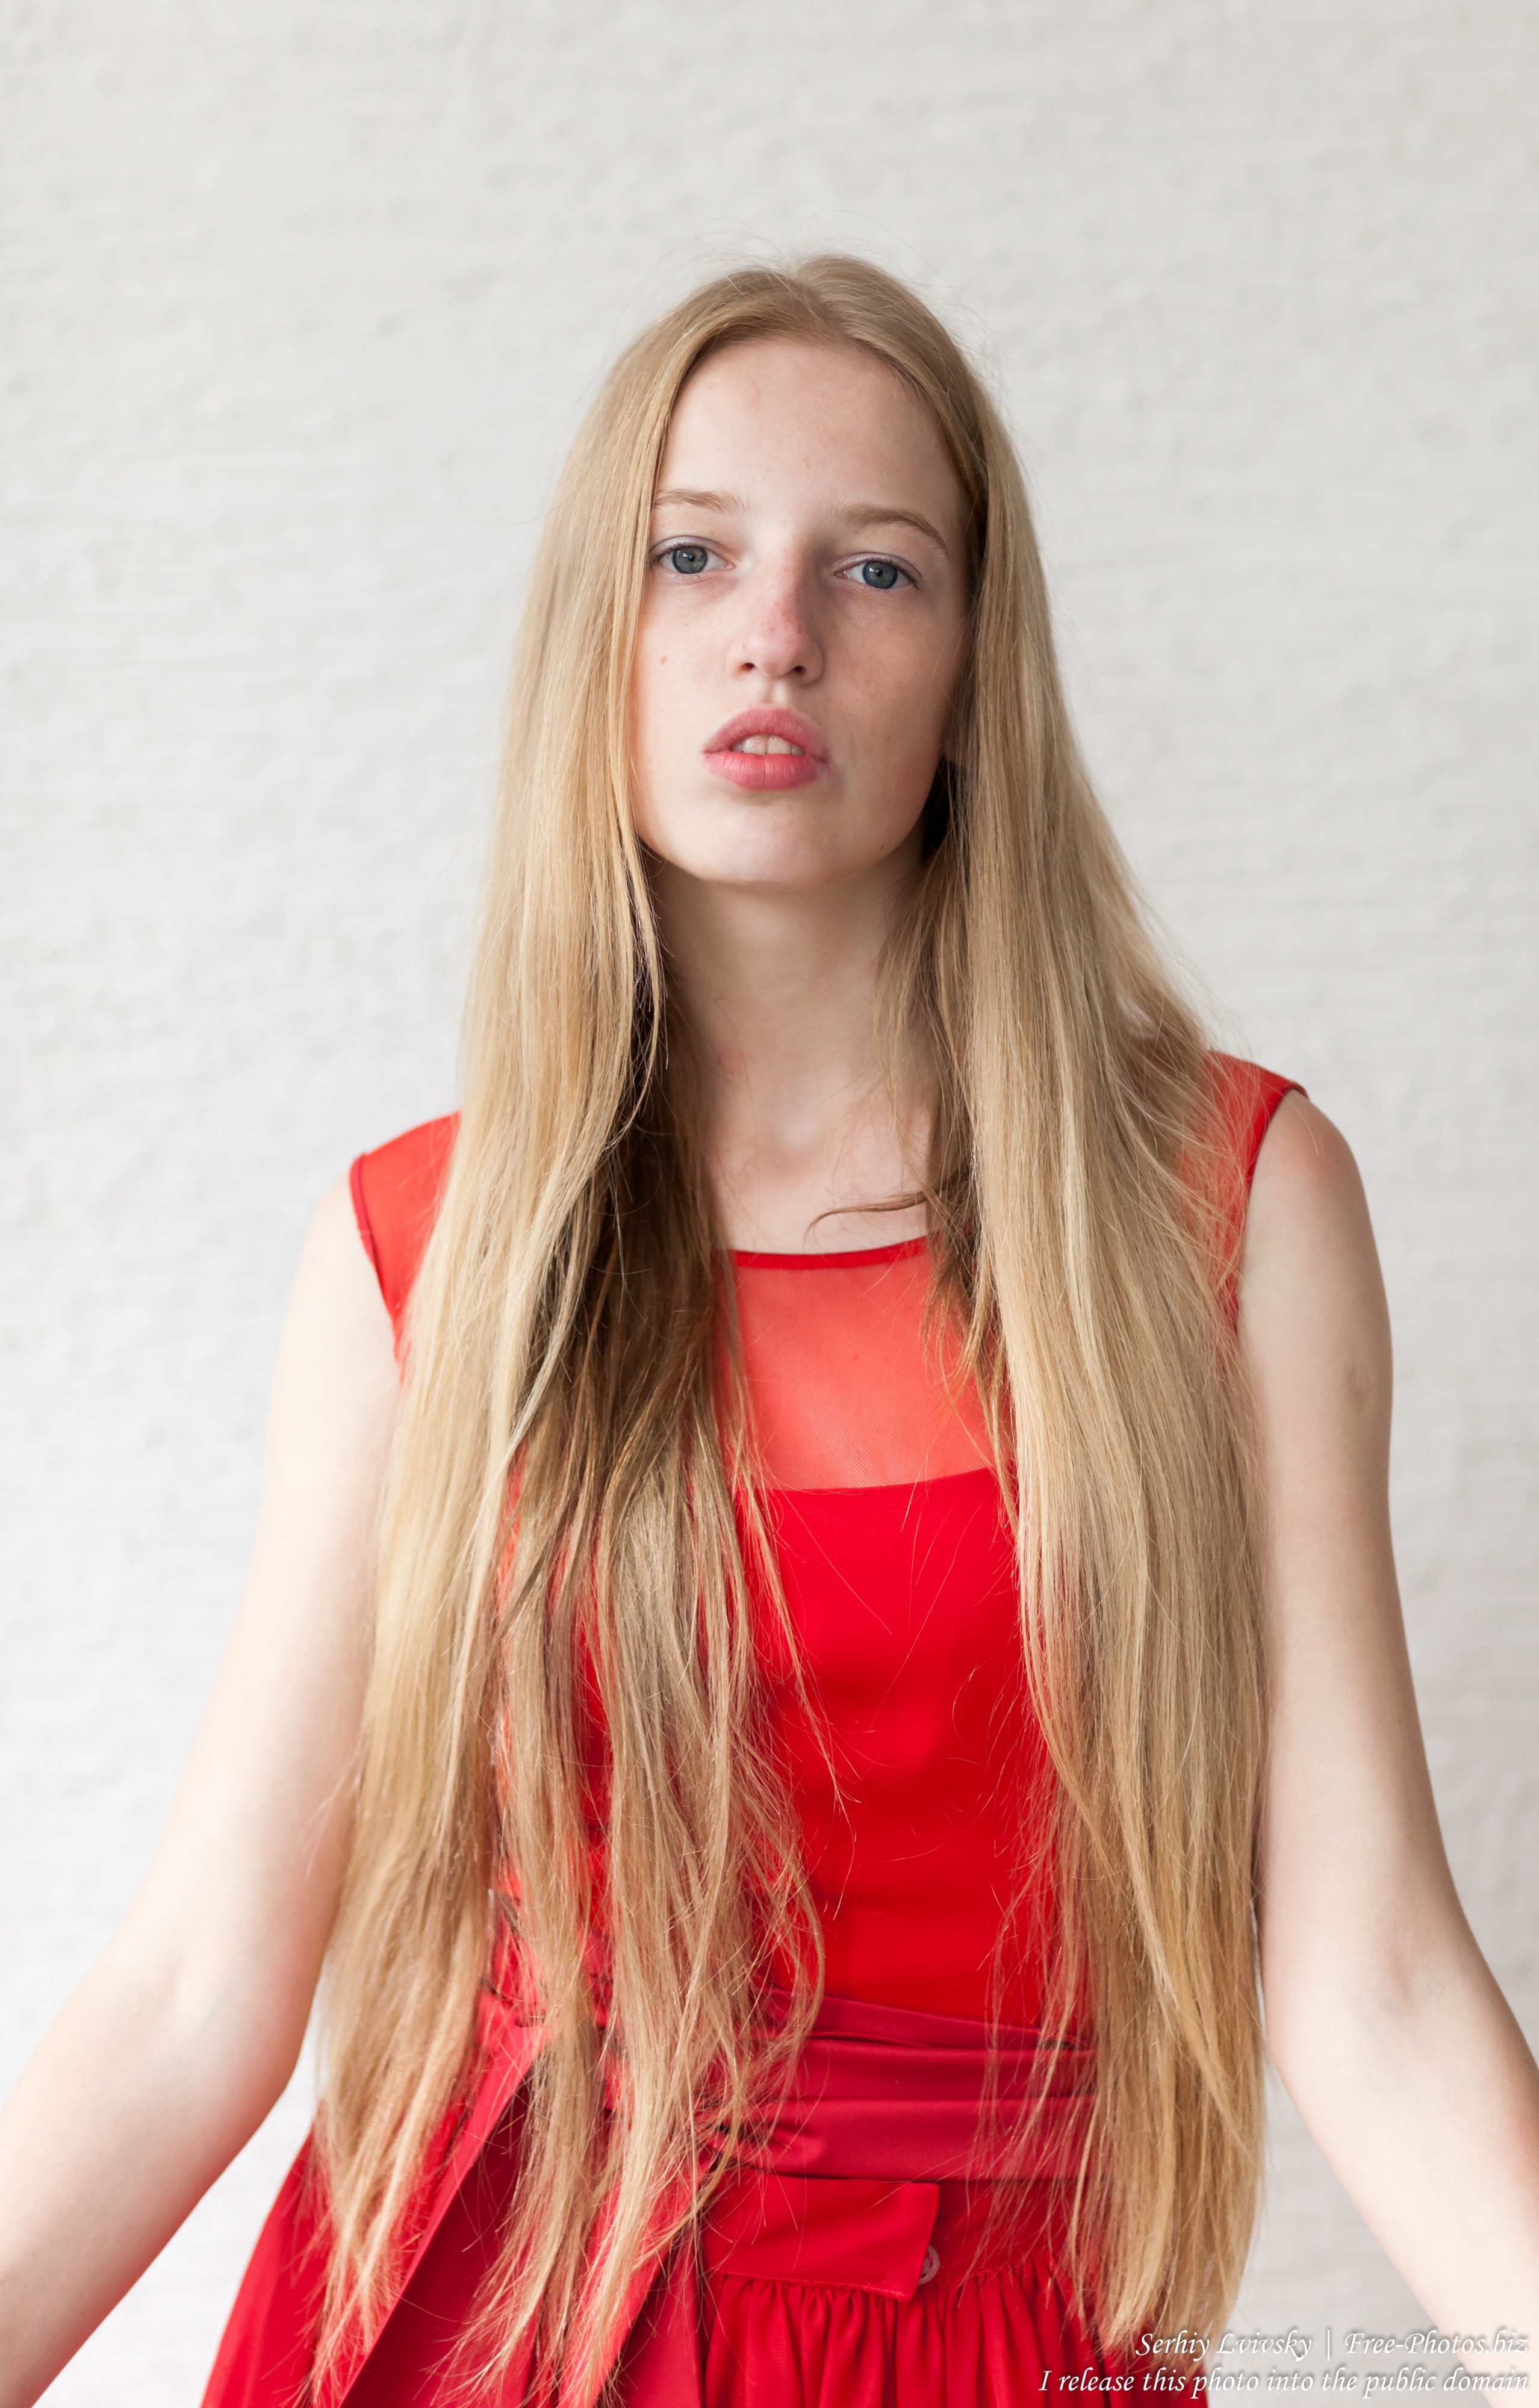 a 17-year-old Catholic natural blond girl photographed in September 2016 by Serhiy Lvivsky, picture 12